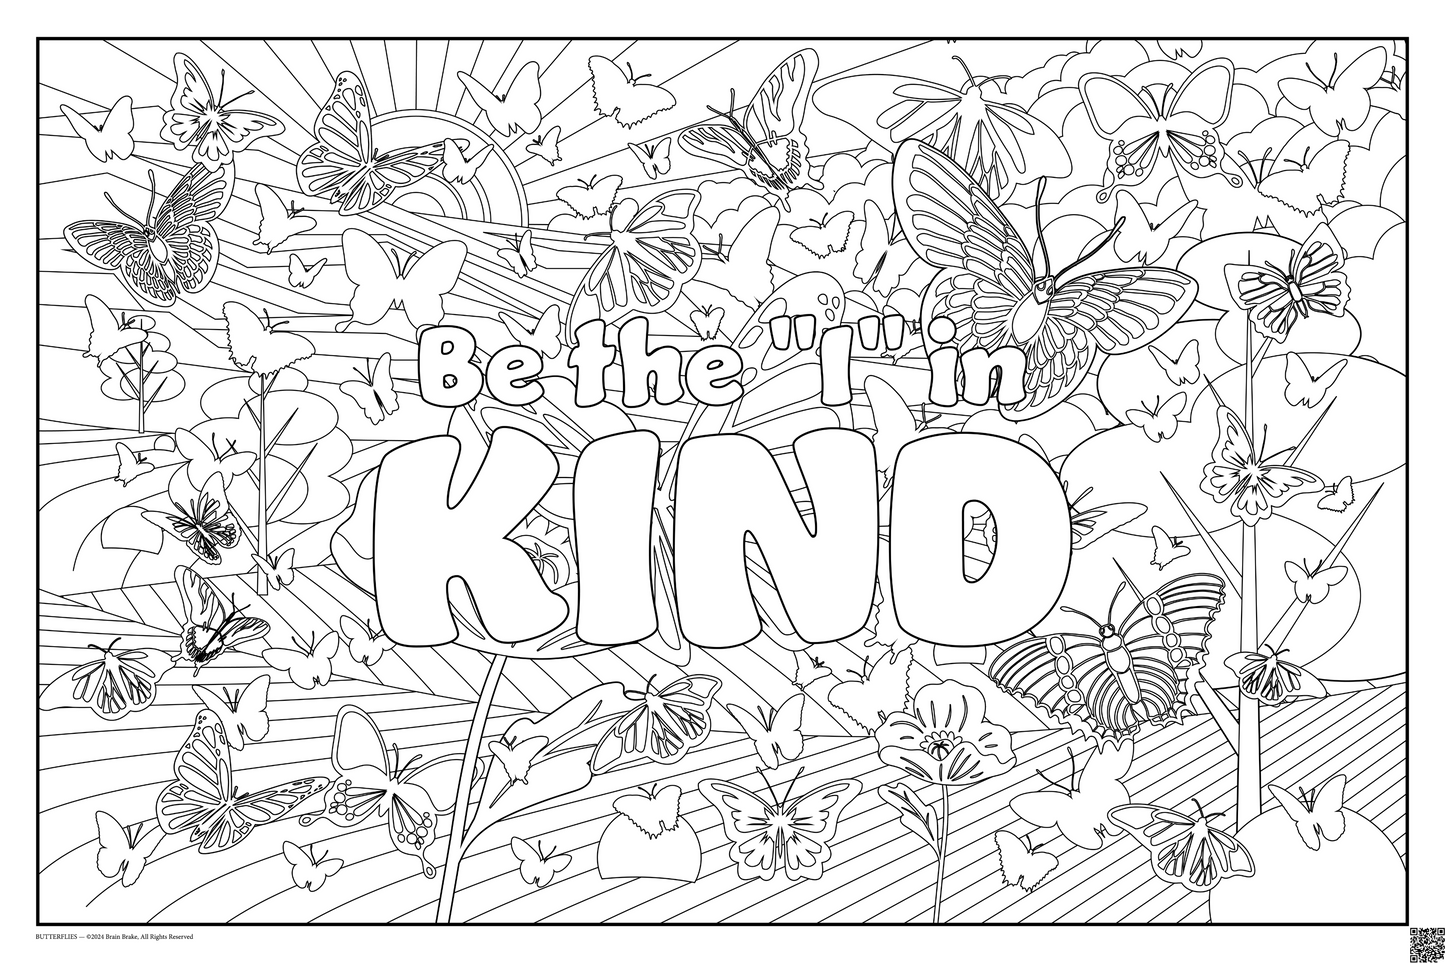 Build Community: Be the "I" in KIND